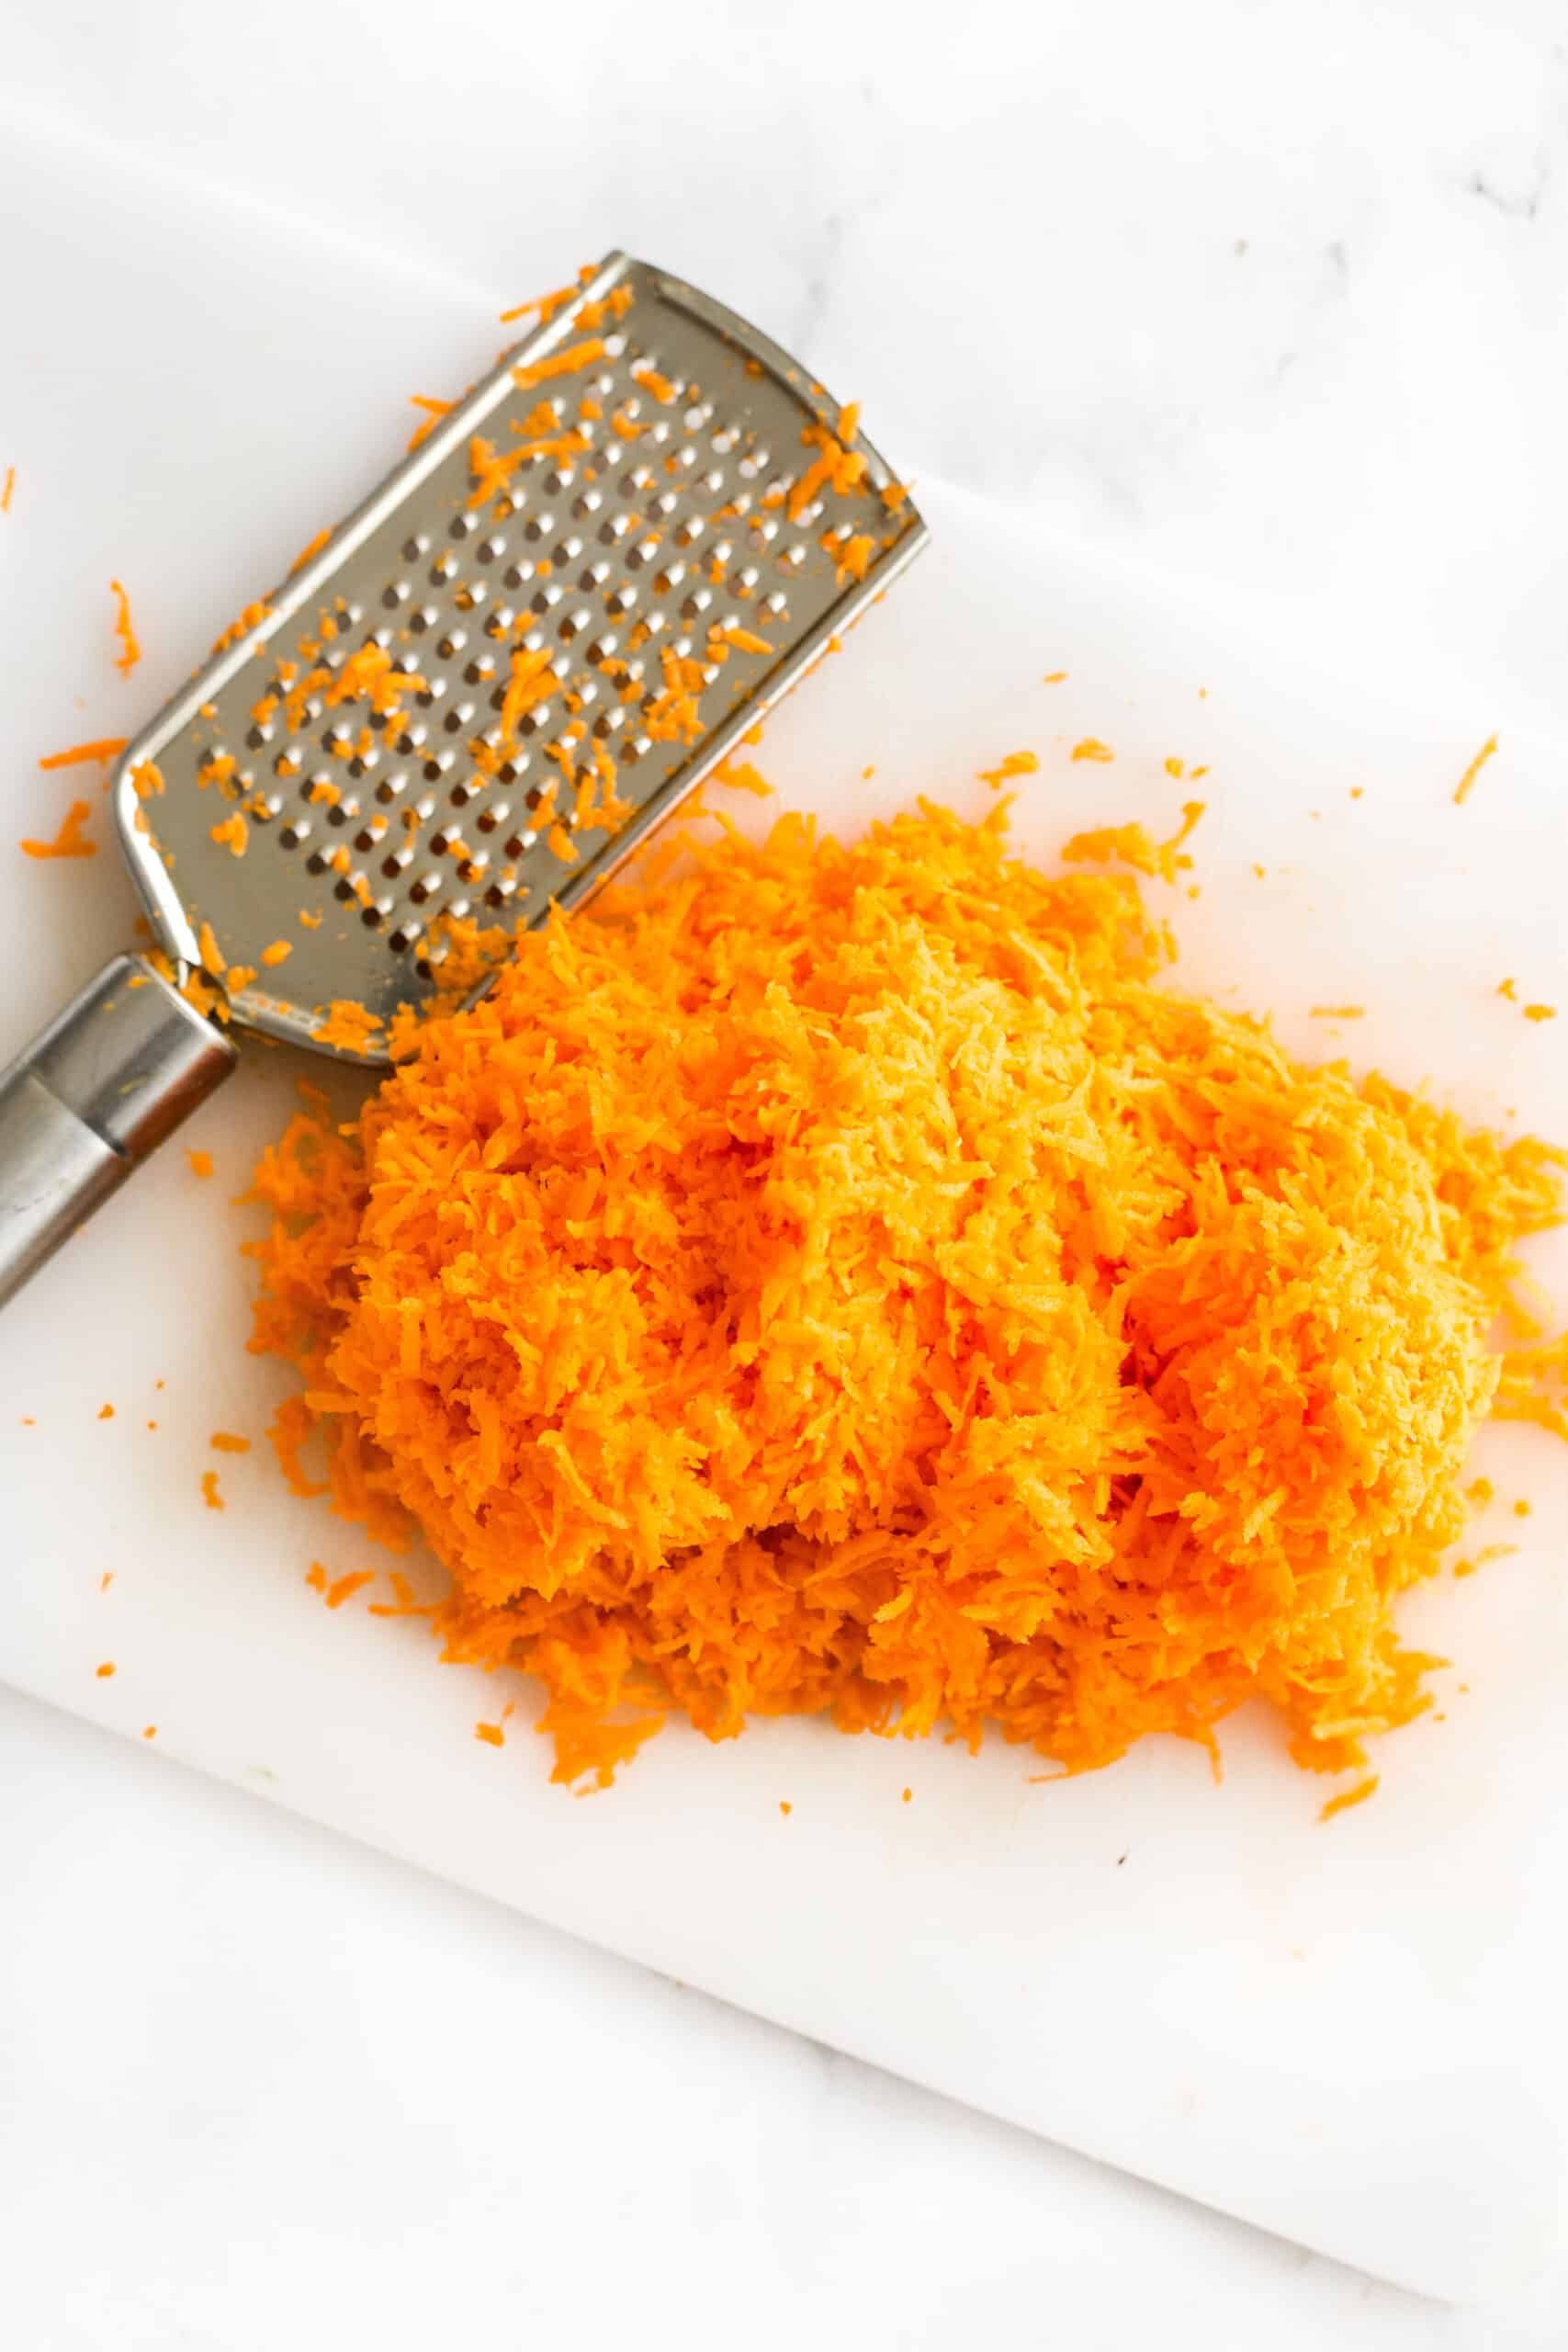 Finely shredded carrots and a grater on a chopping board.